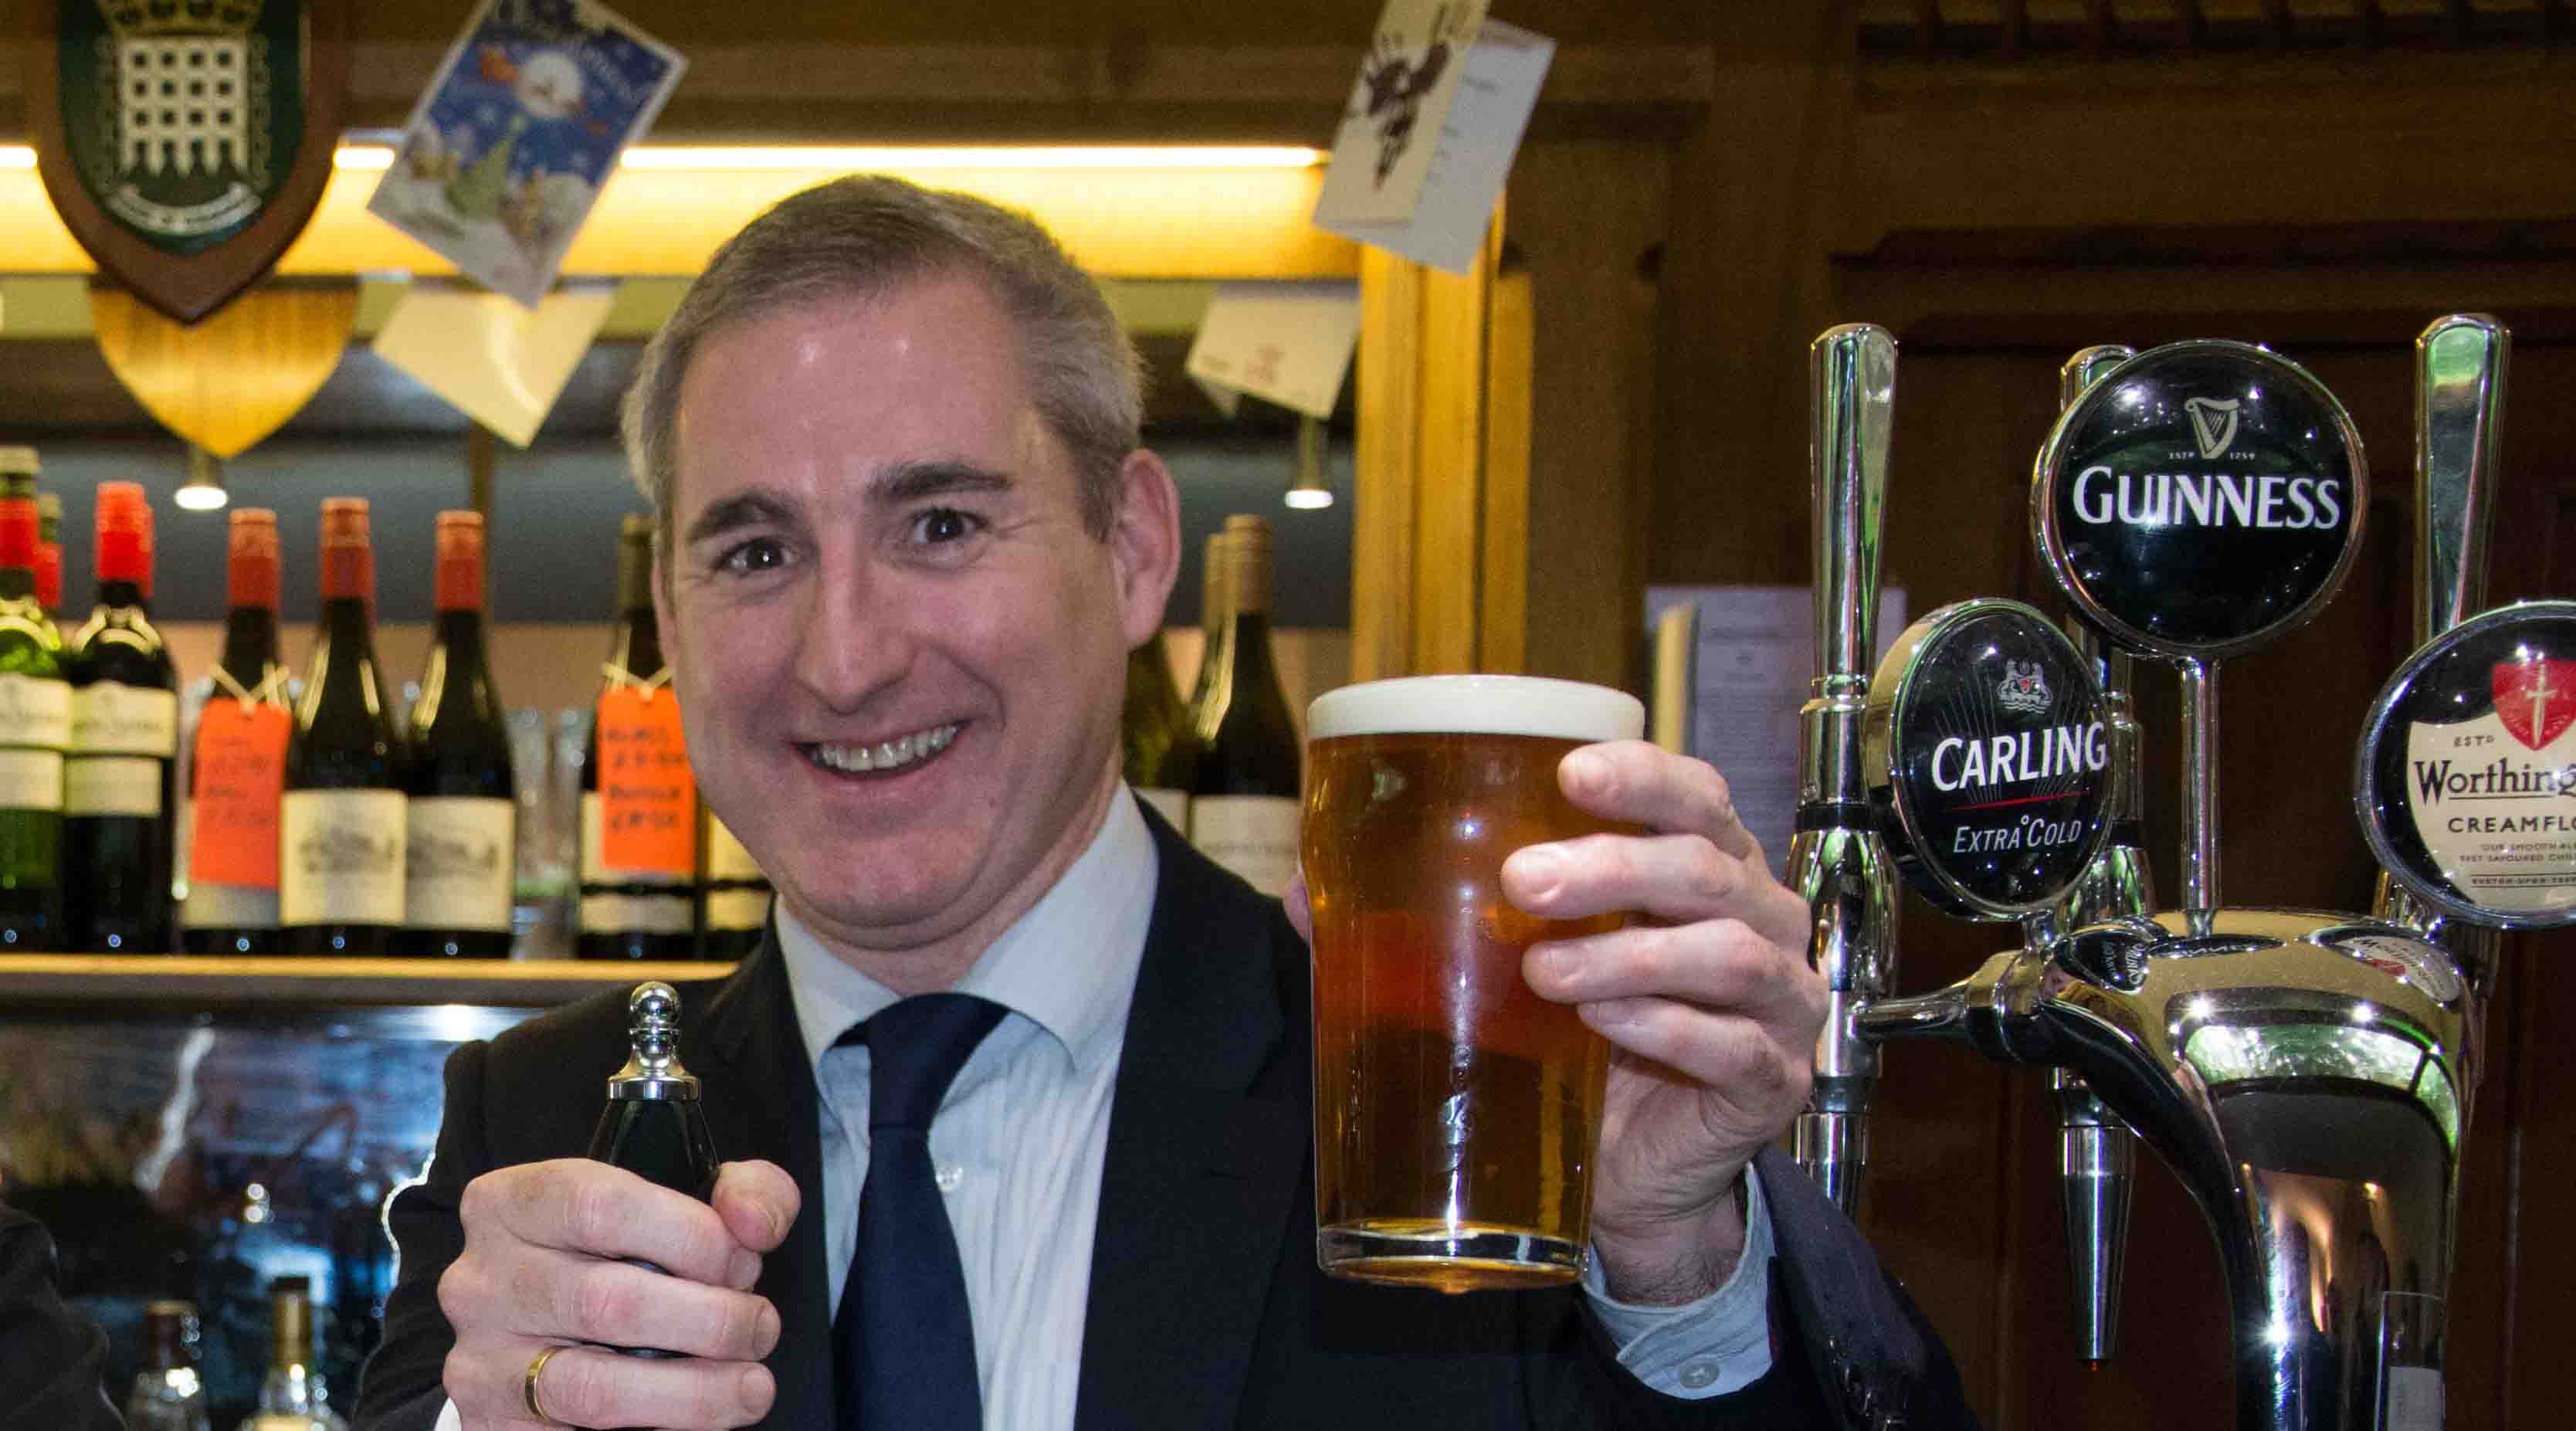 ‘Save the Pub’ All-Party Parliamentary Group founder Greg Mulholland MP